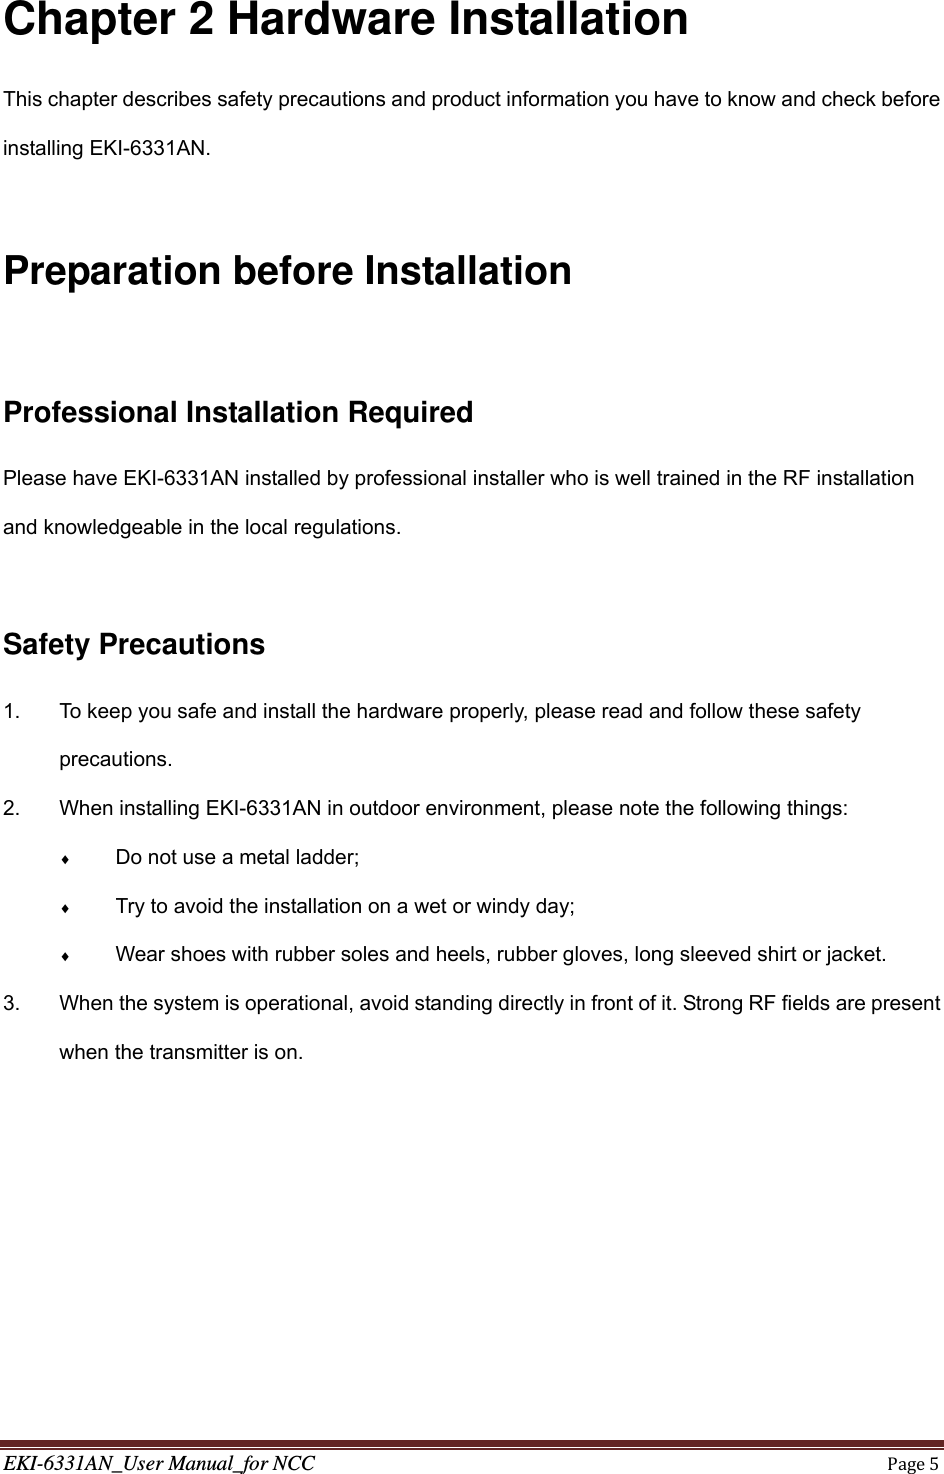 EKI-6331AN_User Manual_for NCCPage5Chapter 2 Hardware Installation This chapter describes safety precautions and product information you have to know and check before installing EKI-6331AN.  Preparation before Installation  Professional Installation Required Please have EKI-6331AN installed by professional installer who is well trained in the RF installation and knowledgeable in the local regulations.  Safety Precautions 1.  To keep you safe and install the hardware properly, please read and follow these safety precautions. 2.  When installing EKI-6331AN in outdoor environment, please note the following things:  Do not use a metal ladder;  Try to avoid the installation on a wet or windy day;  Wear shoes with rubber soles and heels, rubber gloves, long sleeved shirt or jacket. 3.  When the system is operational, avoid standing directly in front of it. Strong RF fields are present when the transmitter is on. 